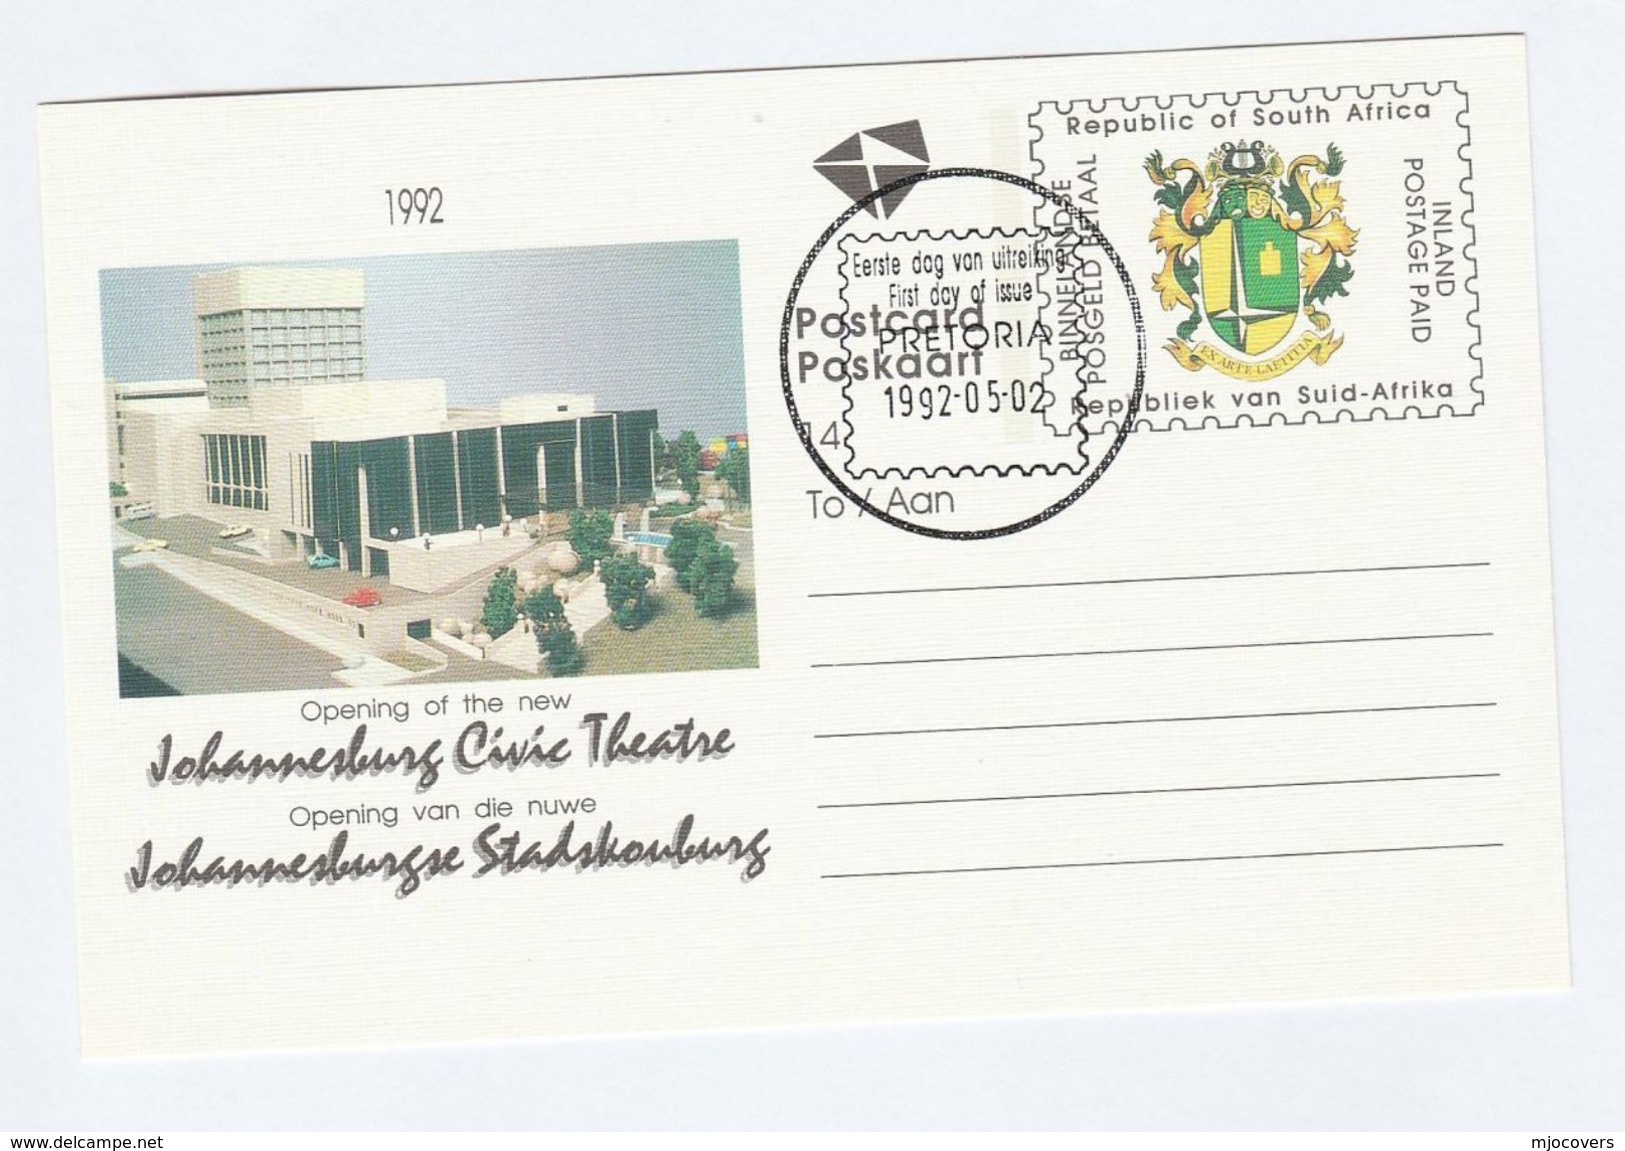 1992 SOUTH AFRICA STATIONERY Illus CIVIC THEATRE At JOHANNESBURG , FIRST DAY Rsa Stamps Postal Card Cover - Storia Postale